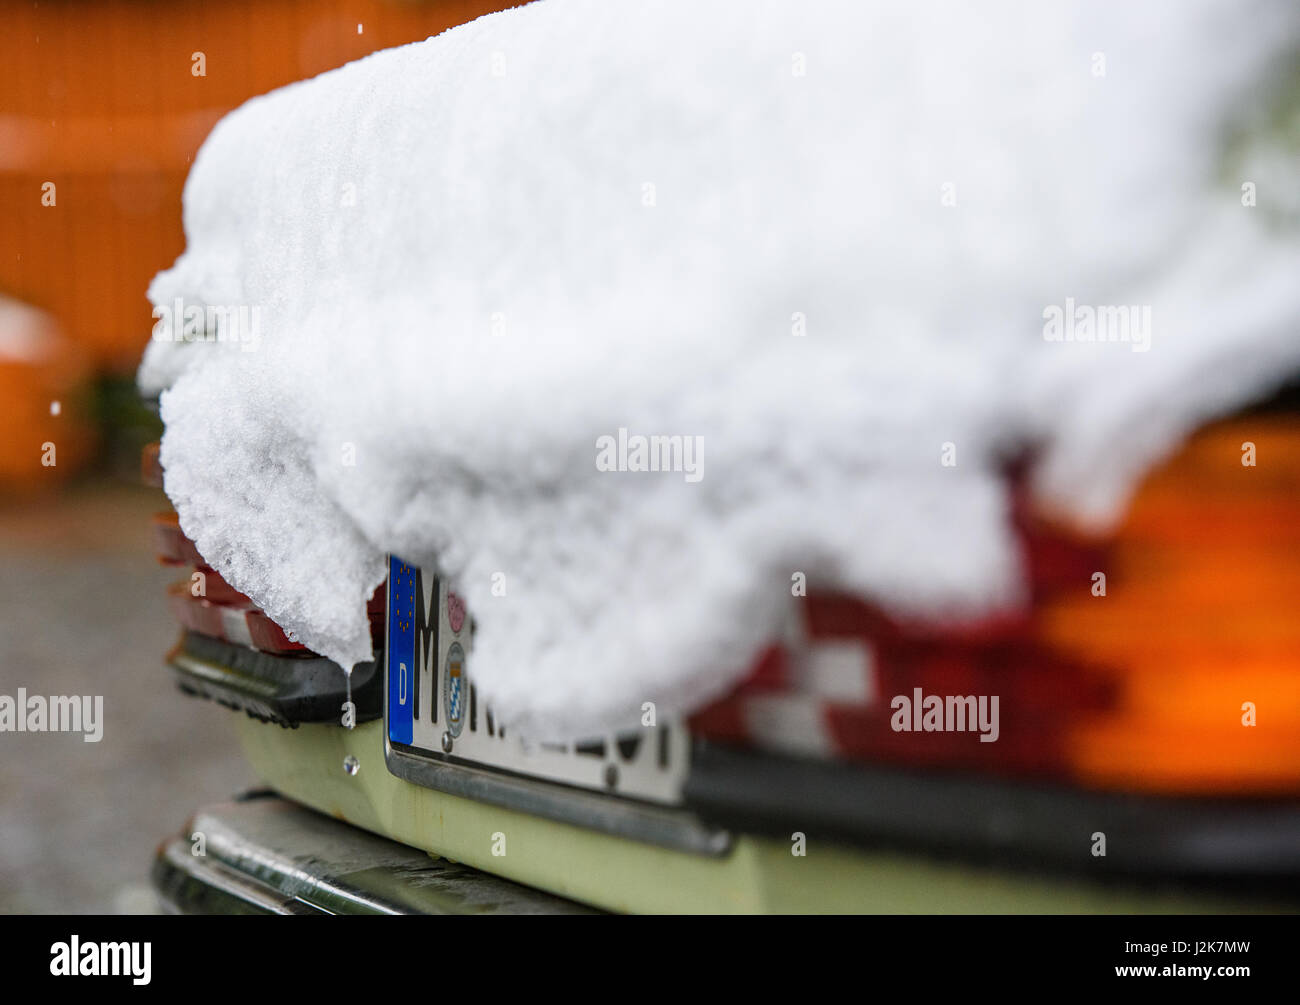 Munich, Germany. 28th Apr, 2017. The trunk of a vehicle is covered in snow in Munich, Germany, 28 April 2017. Photo: Florian Eckl/dpa/Alamy Live News Stock Photo